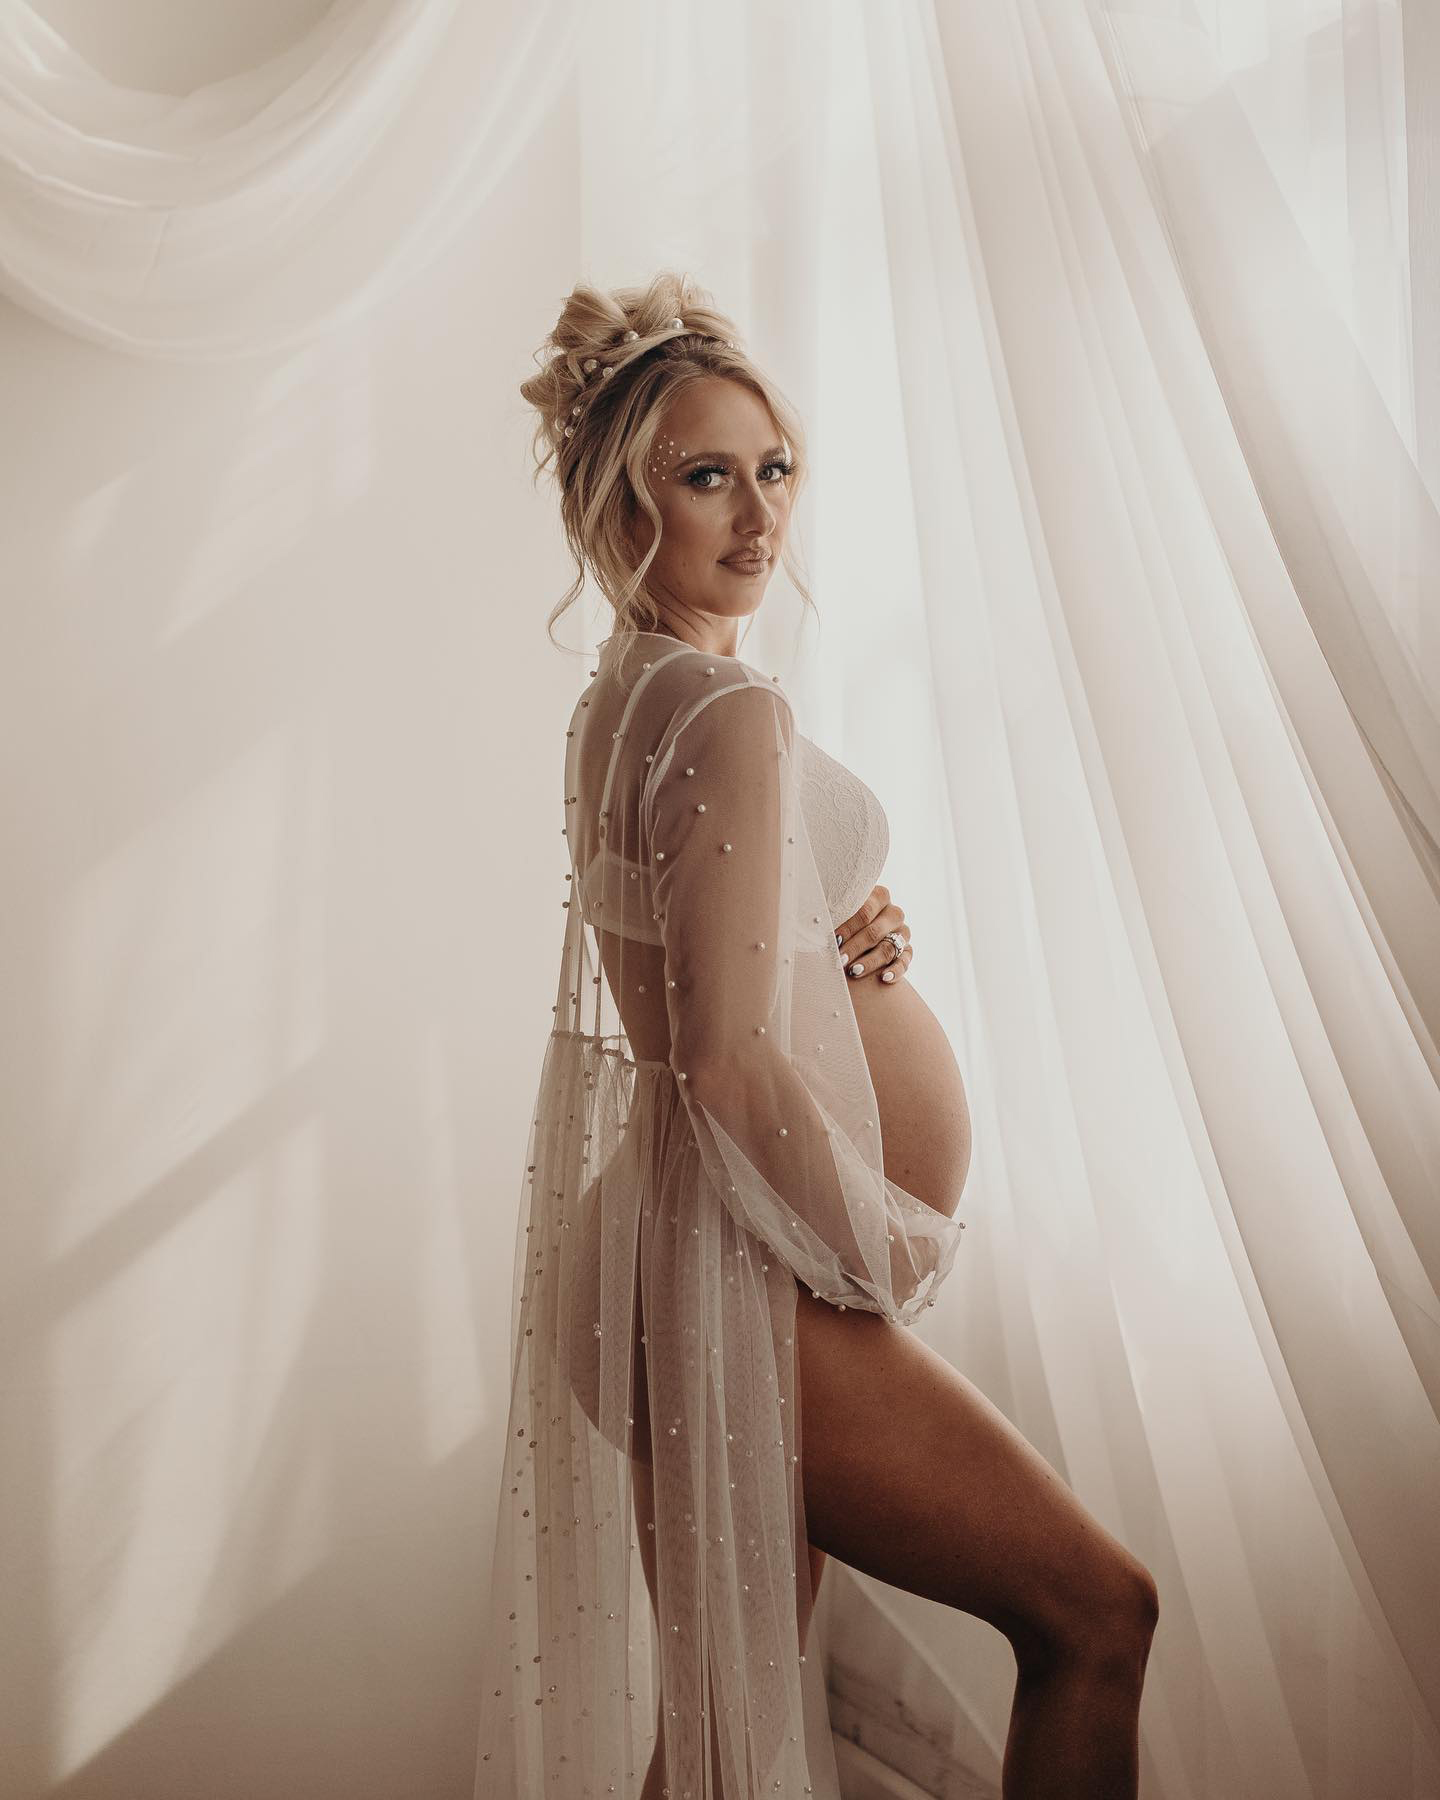 Brittany Matthews Embraced Body More This Pregnancy Pics pic